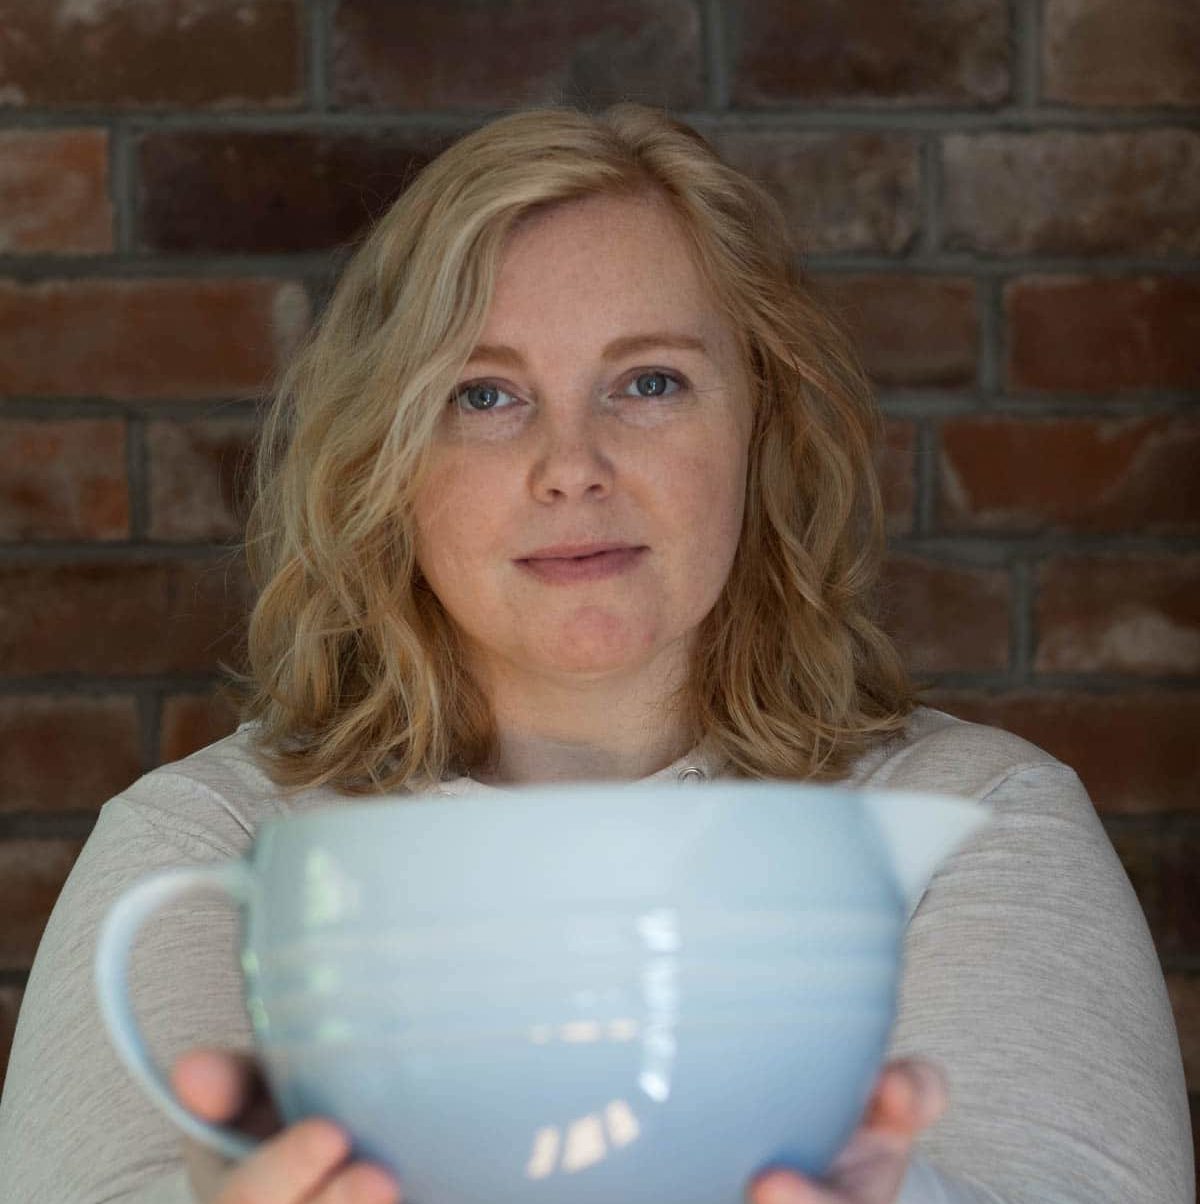 Woman holding a large mixing bowl.